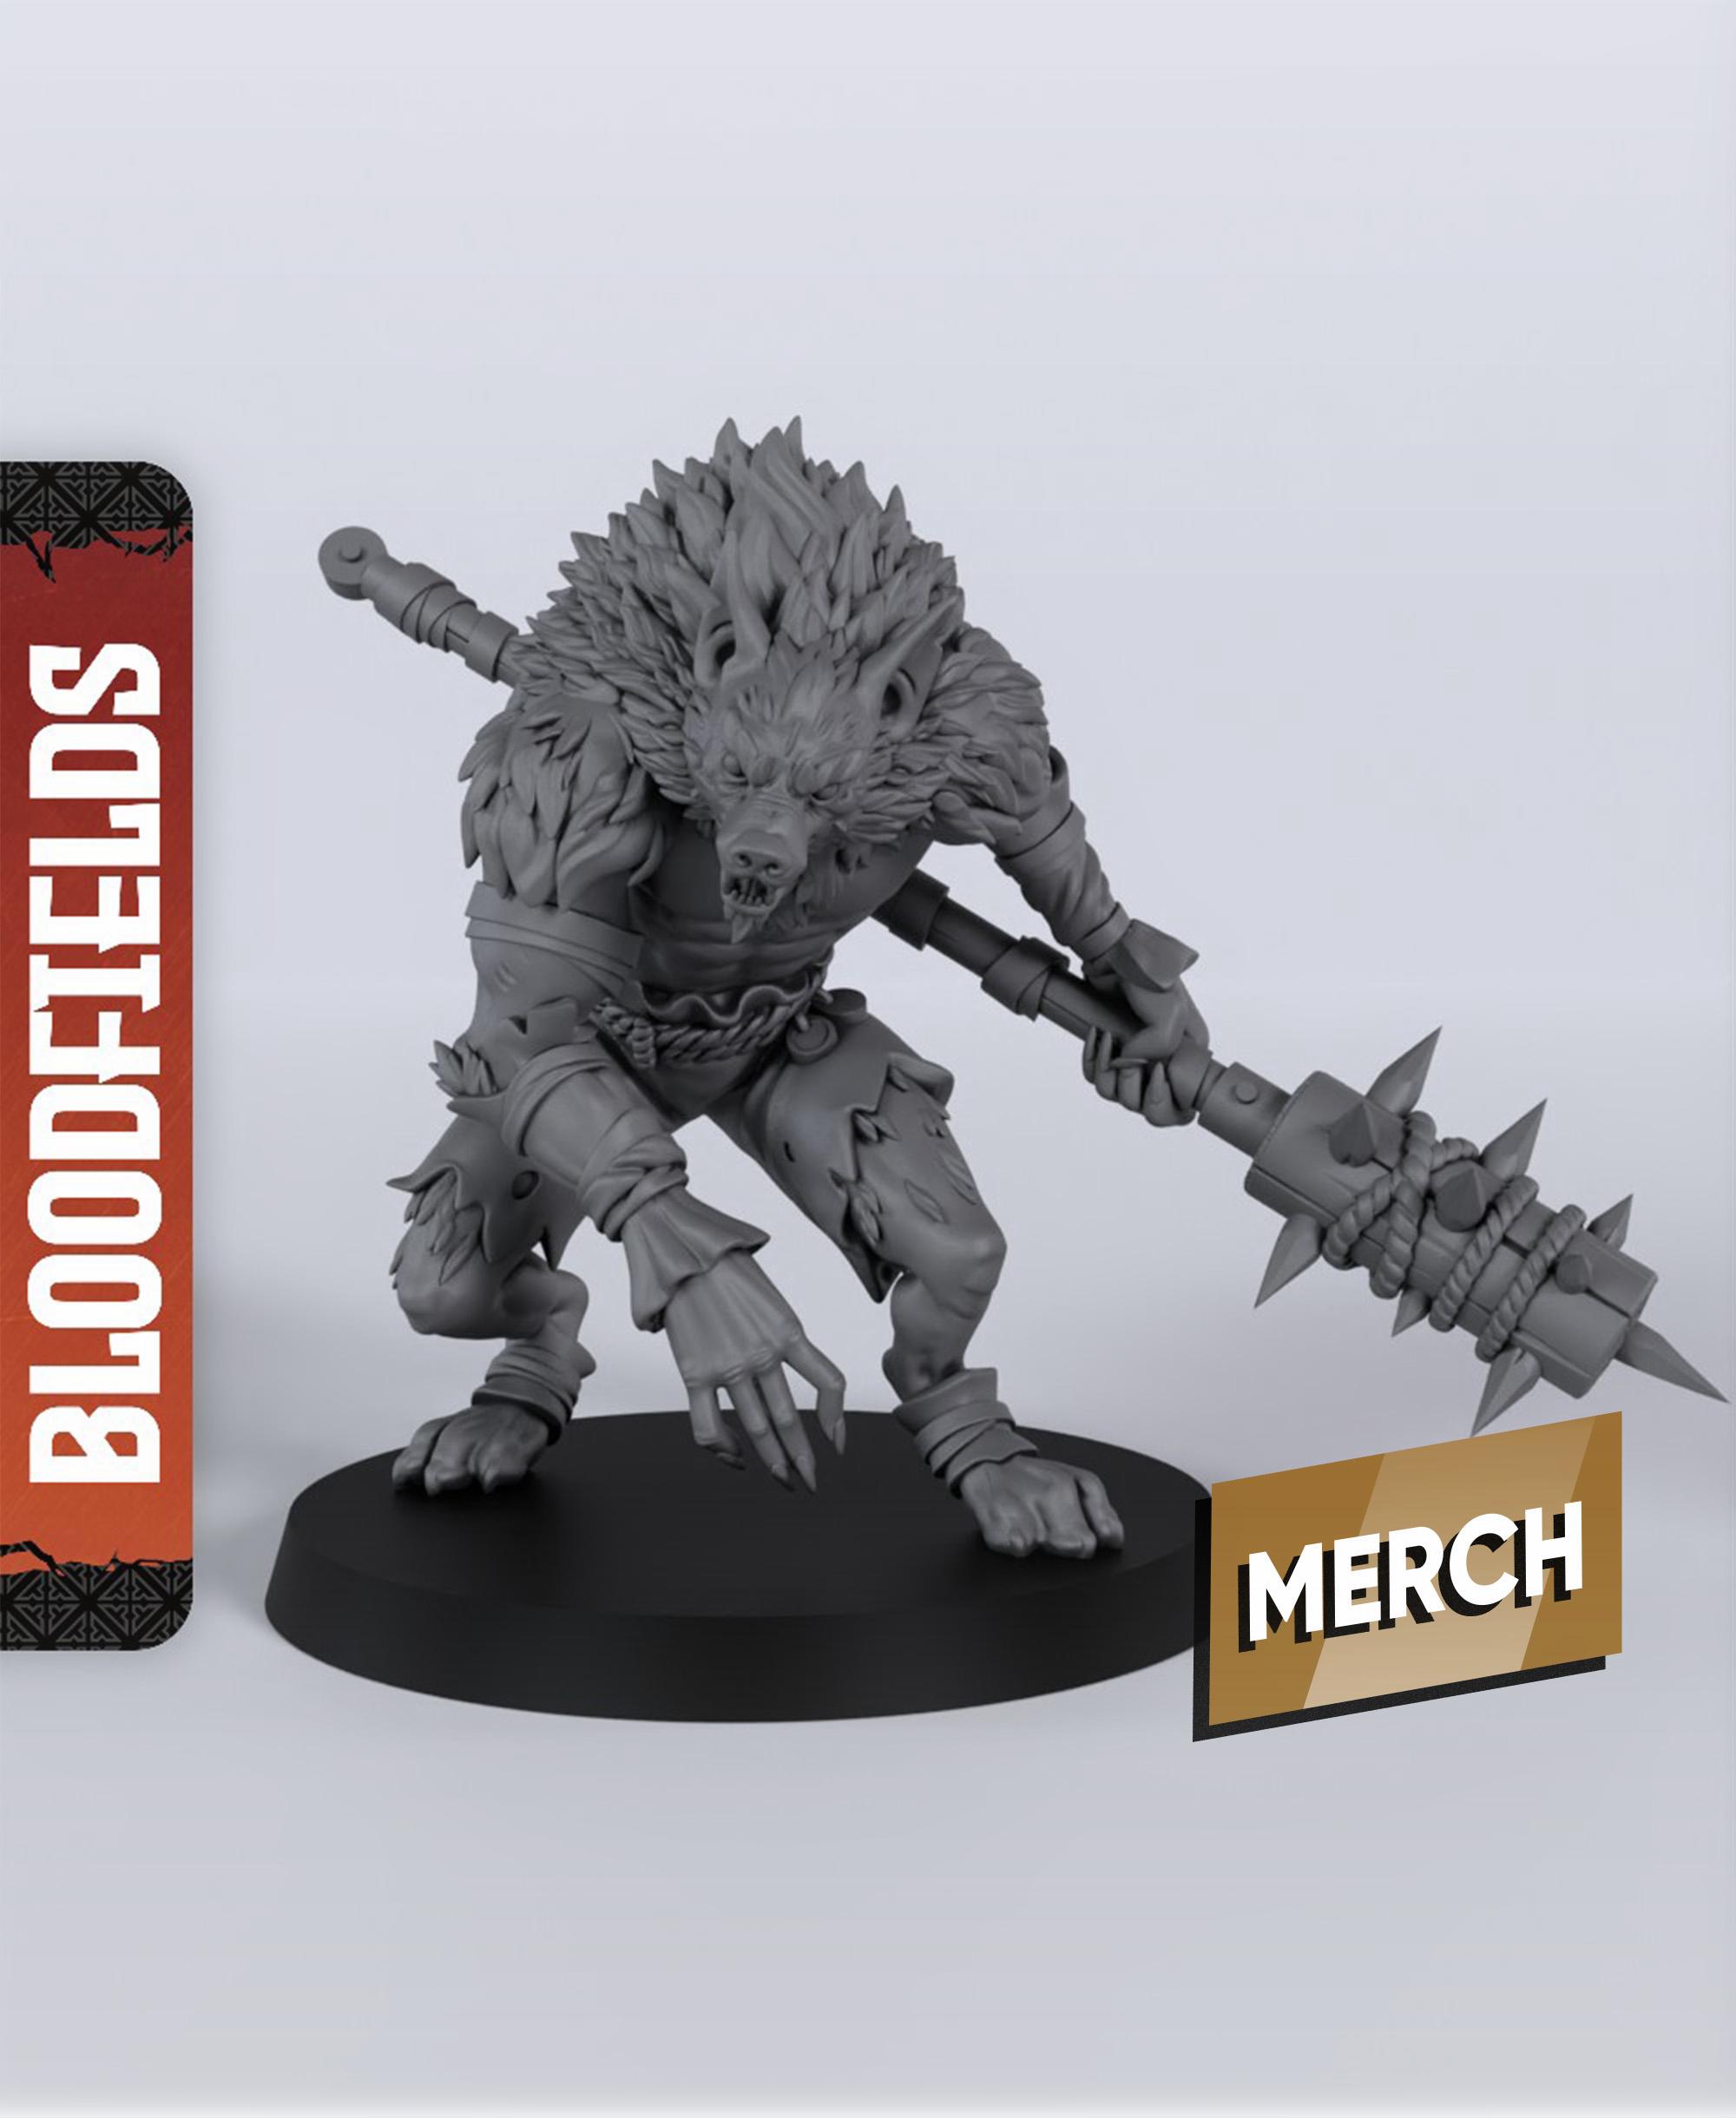 Werewolf Lupo - With Free Dragon Warhammer - 5e DnD Inspired for RPG and Wargamers 3d model